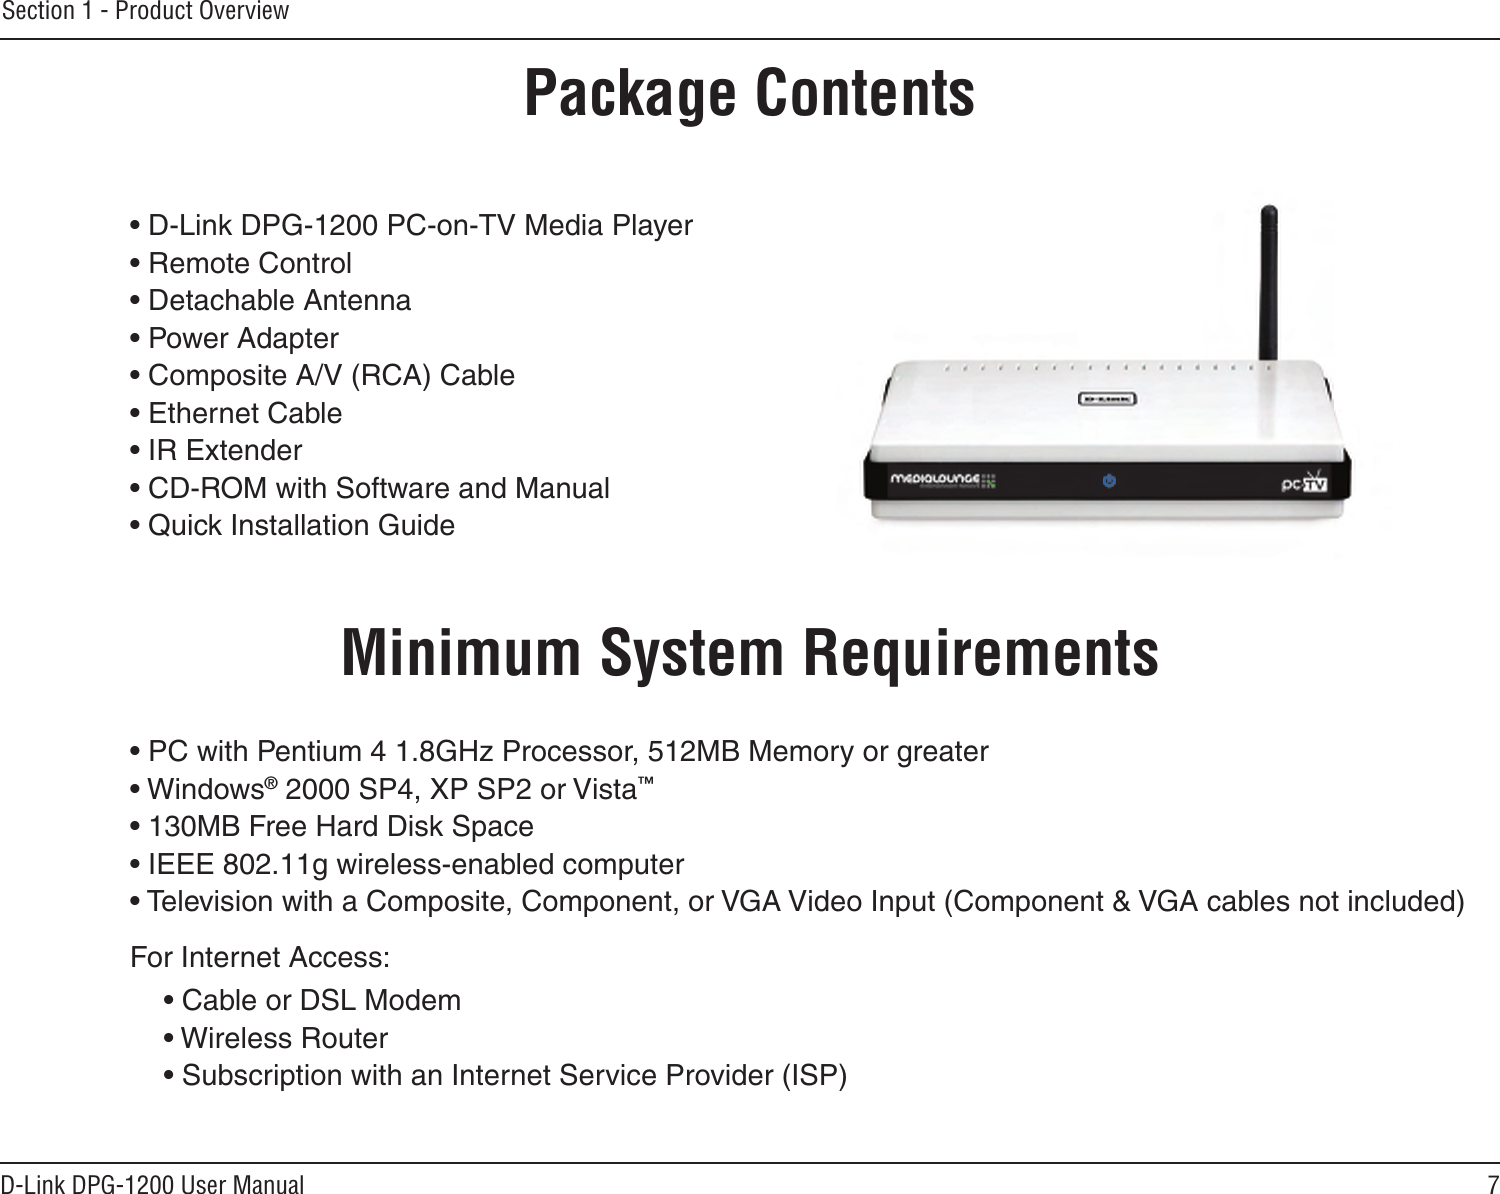 7D-Link DPG-1200 User ManualSection 1 - Product Overview• D-Link DPG-1200 PC-on-TV Media Player• Remote Control• Detachable Antenna• Power Adapter• Composite A/V (RCA) Cable• Ethernet Cable• IR Extender • CD-ROM with Software and Manual• Quick Installation GuideMinimum System Requirements• PC with Pentium 4 1.8GHz Processor, 512MB Memory or greater• Windows® 2000 SP4, XP SP2 or Vista™• 130MB Free Hard Disk Space• IEEE 802.11g wireless-enabled computer• Television with a Composite, Component, or VGA Video Input (Component &amp; VGA cables not included)For Internet Access:• Cable or DSL Modem• Wireless Router • Subscription with an Internet Service Provider (ISP)Product OverviewPackage Contents